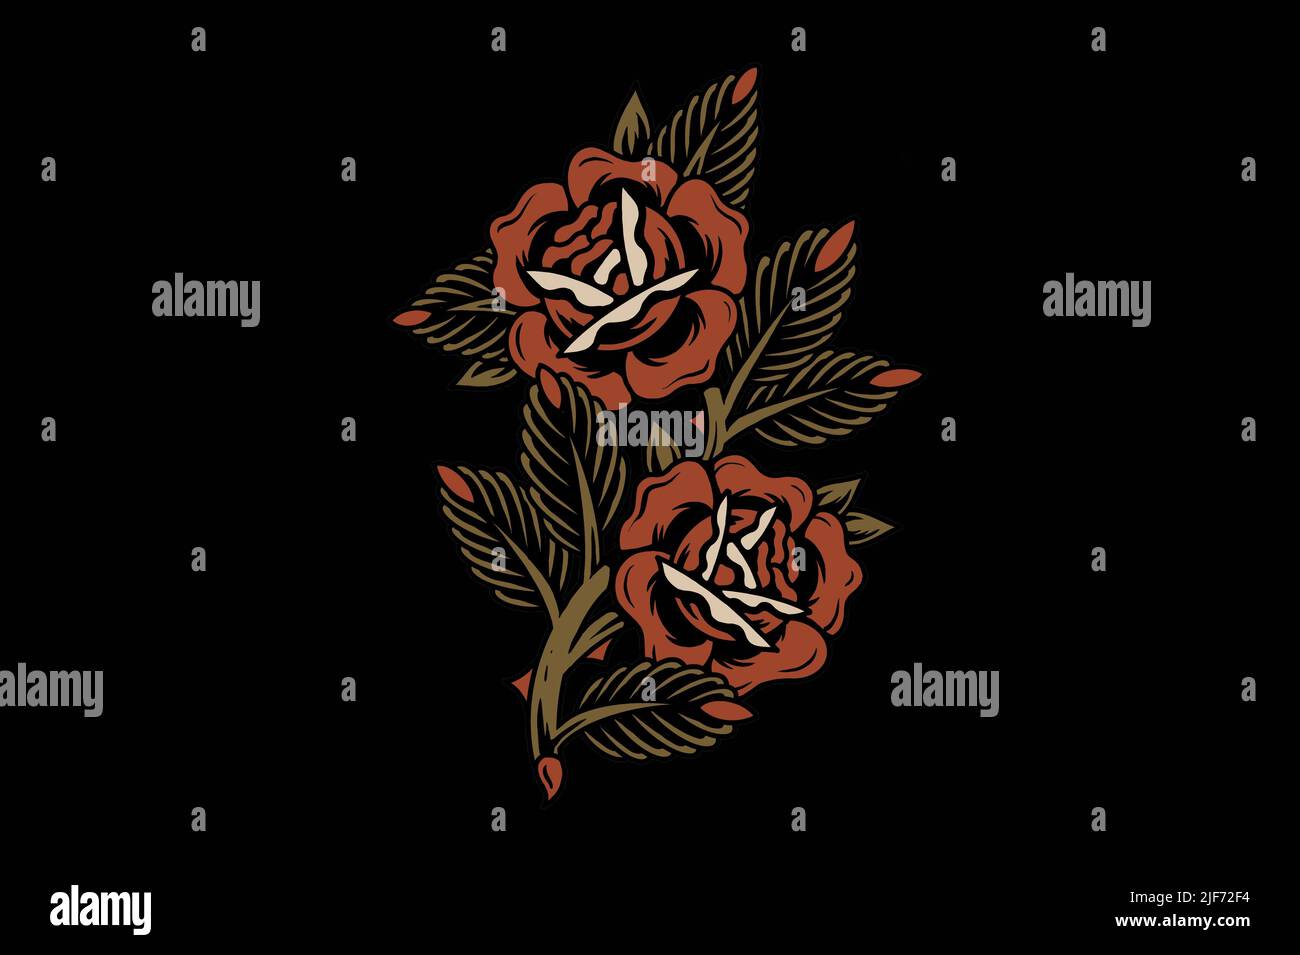 Old school tattoo style graphic design drawing roses Stock Photo